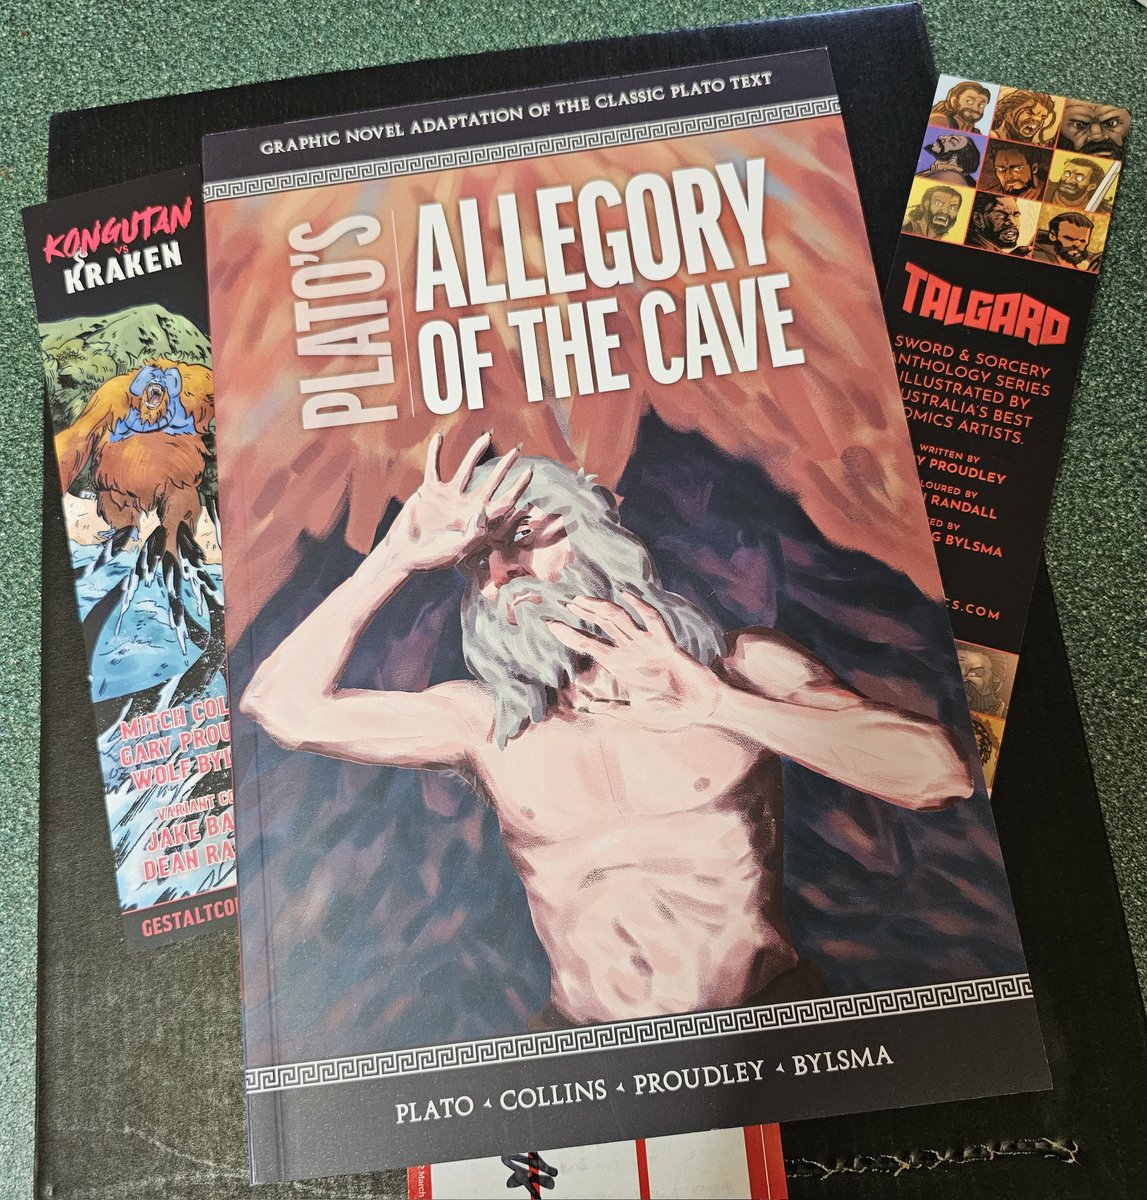 My package from @gestaltcomics arrived today!

Hat-tip to @BrainBeastShaun for making me aware this existed, and @gary_proudley & @illustration_mc for existing it!